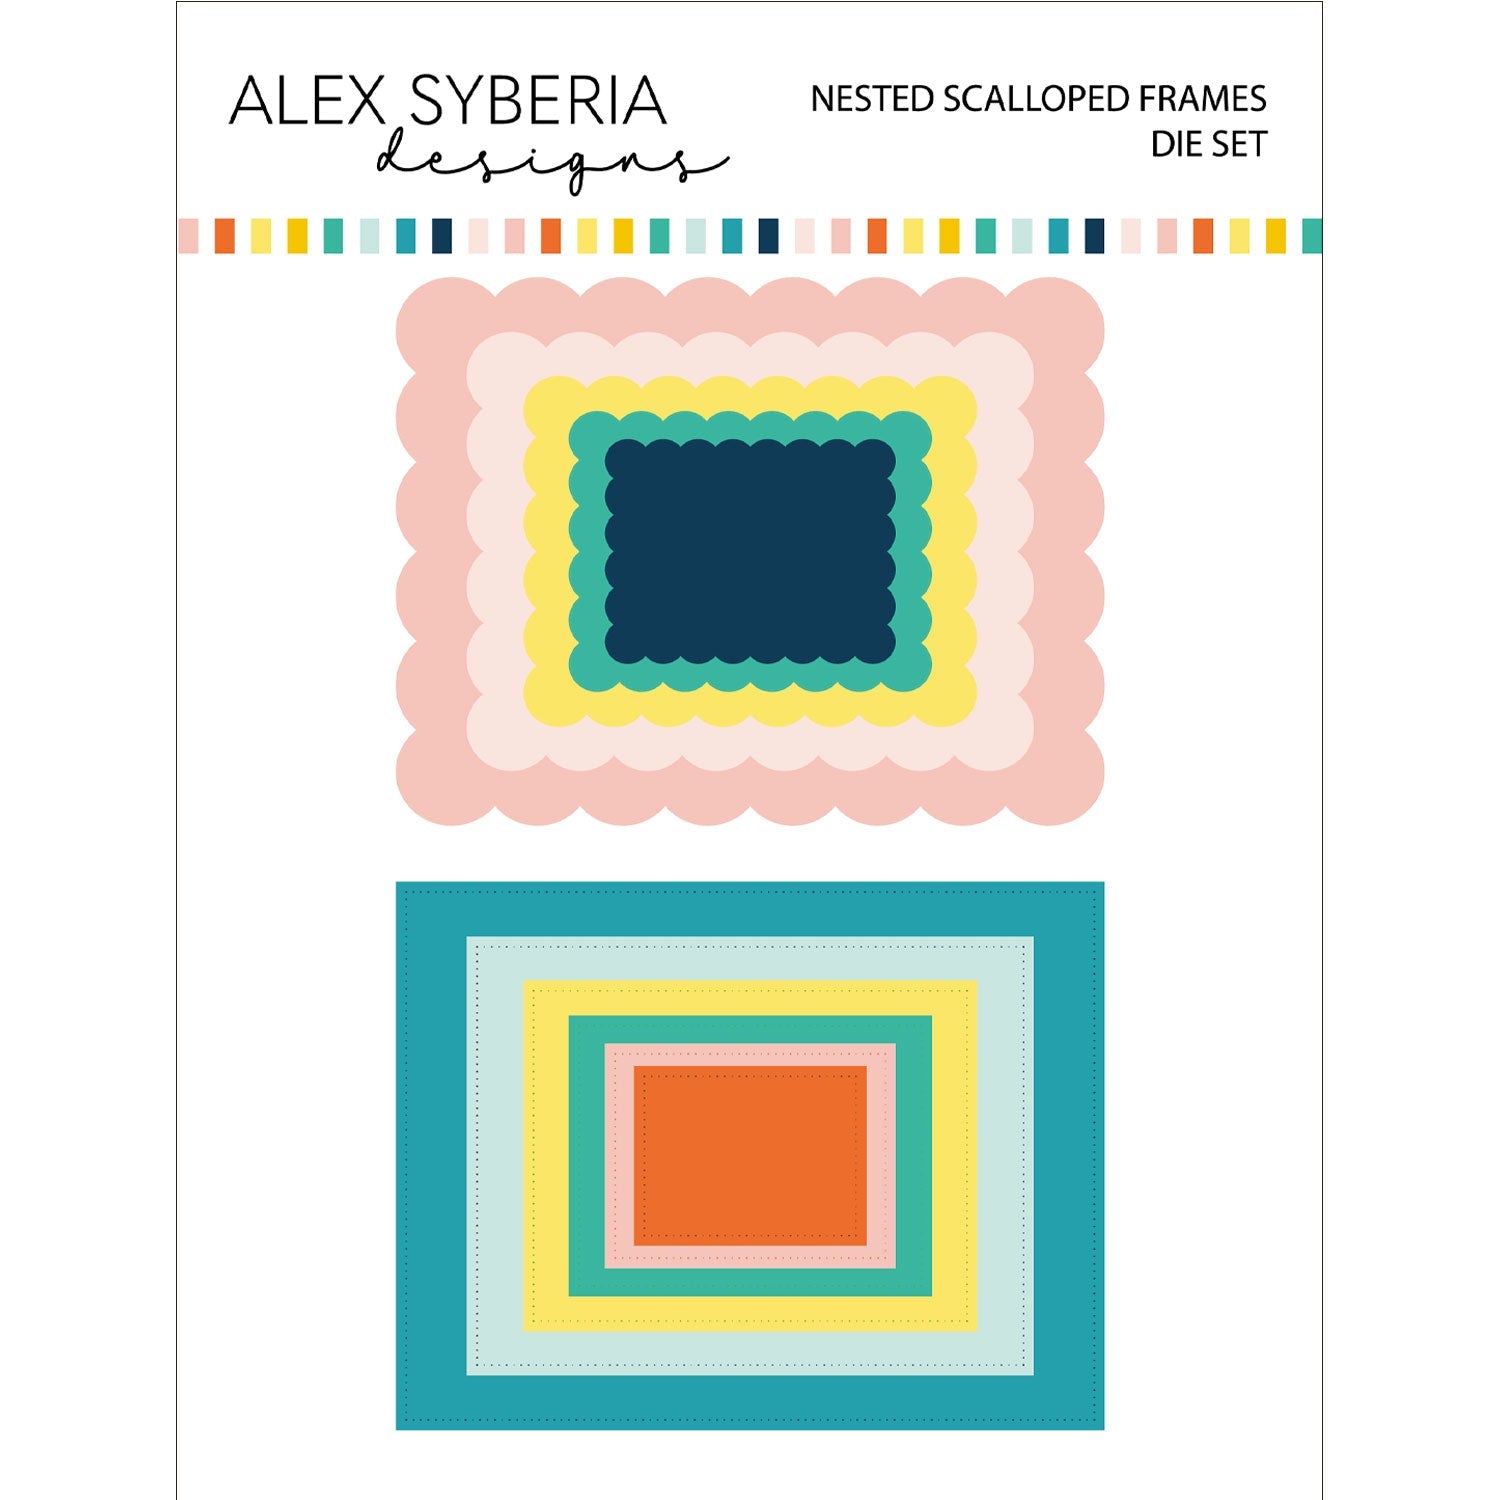 Nested-Scalloped-frames-Die-set-alex-syberia-designs-hand-made-blog-cardmaking-scrapbooking-basic shapes-rectangle